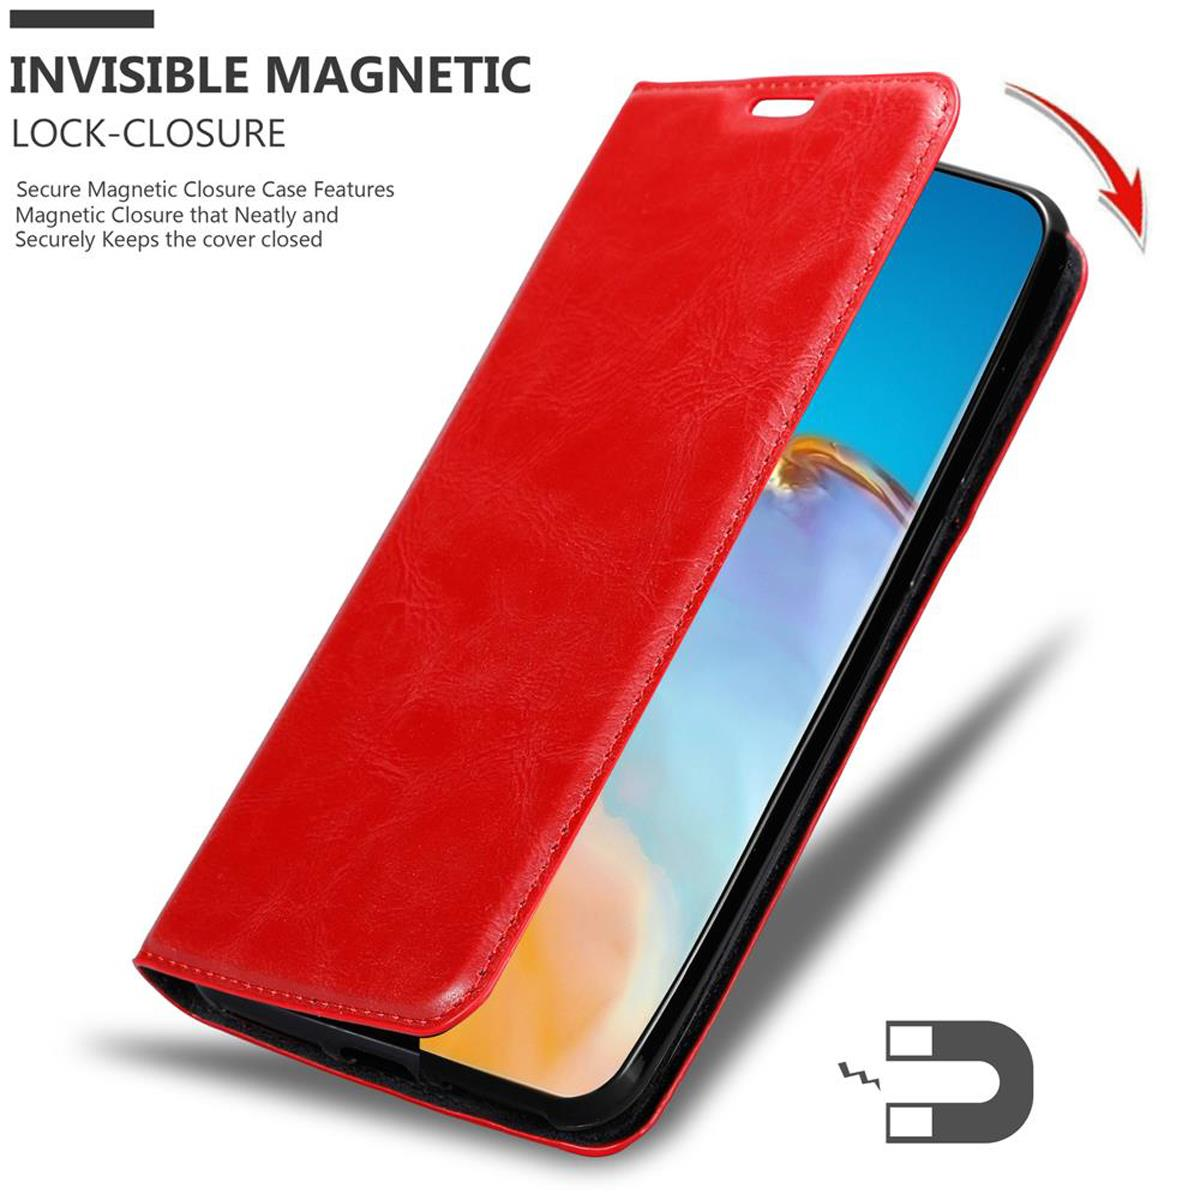 P40 Invisible PRO ROT P40 / Huawei, Bookcover, APFEL CADORABO PRO+, Magnet, Book Hülle